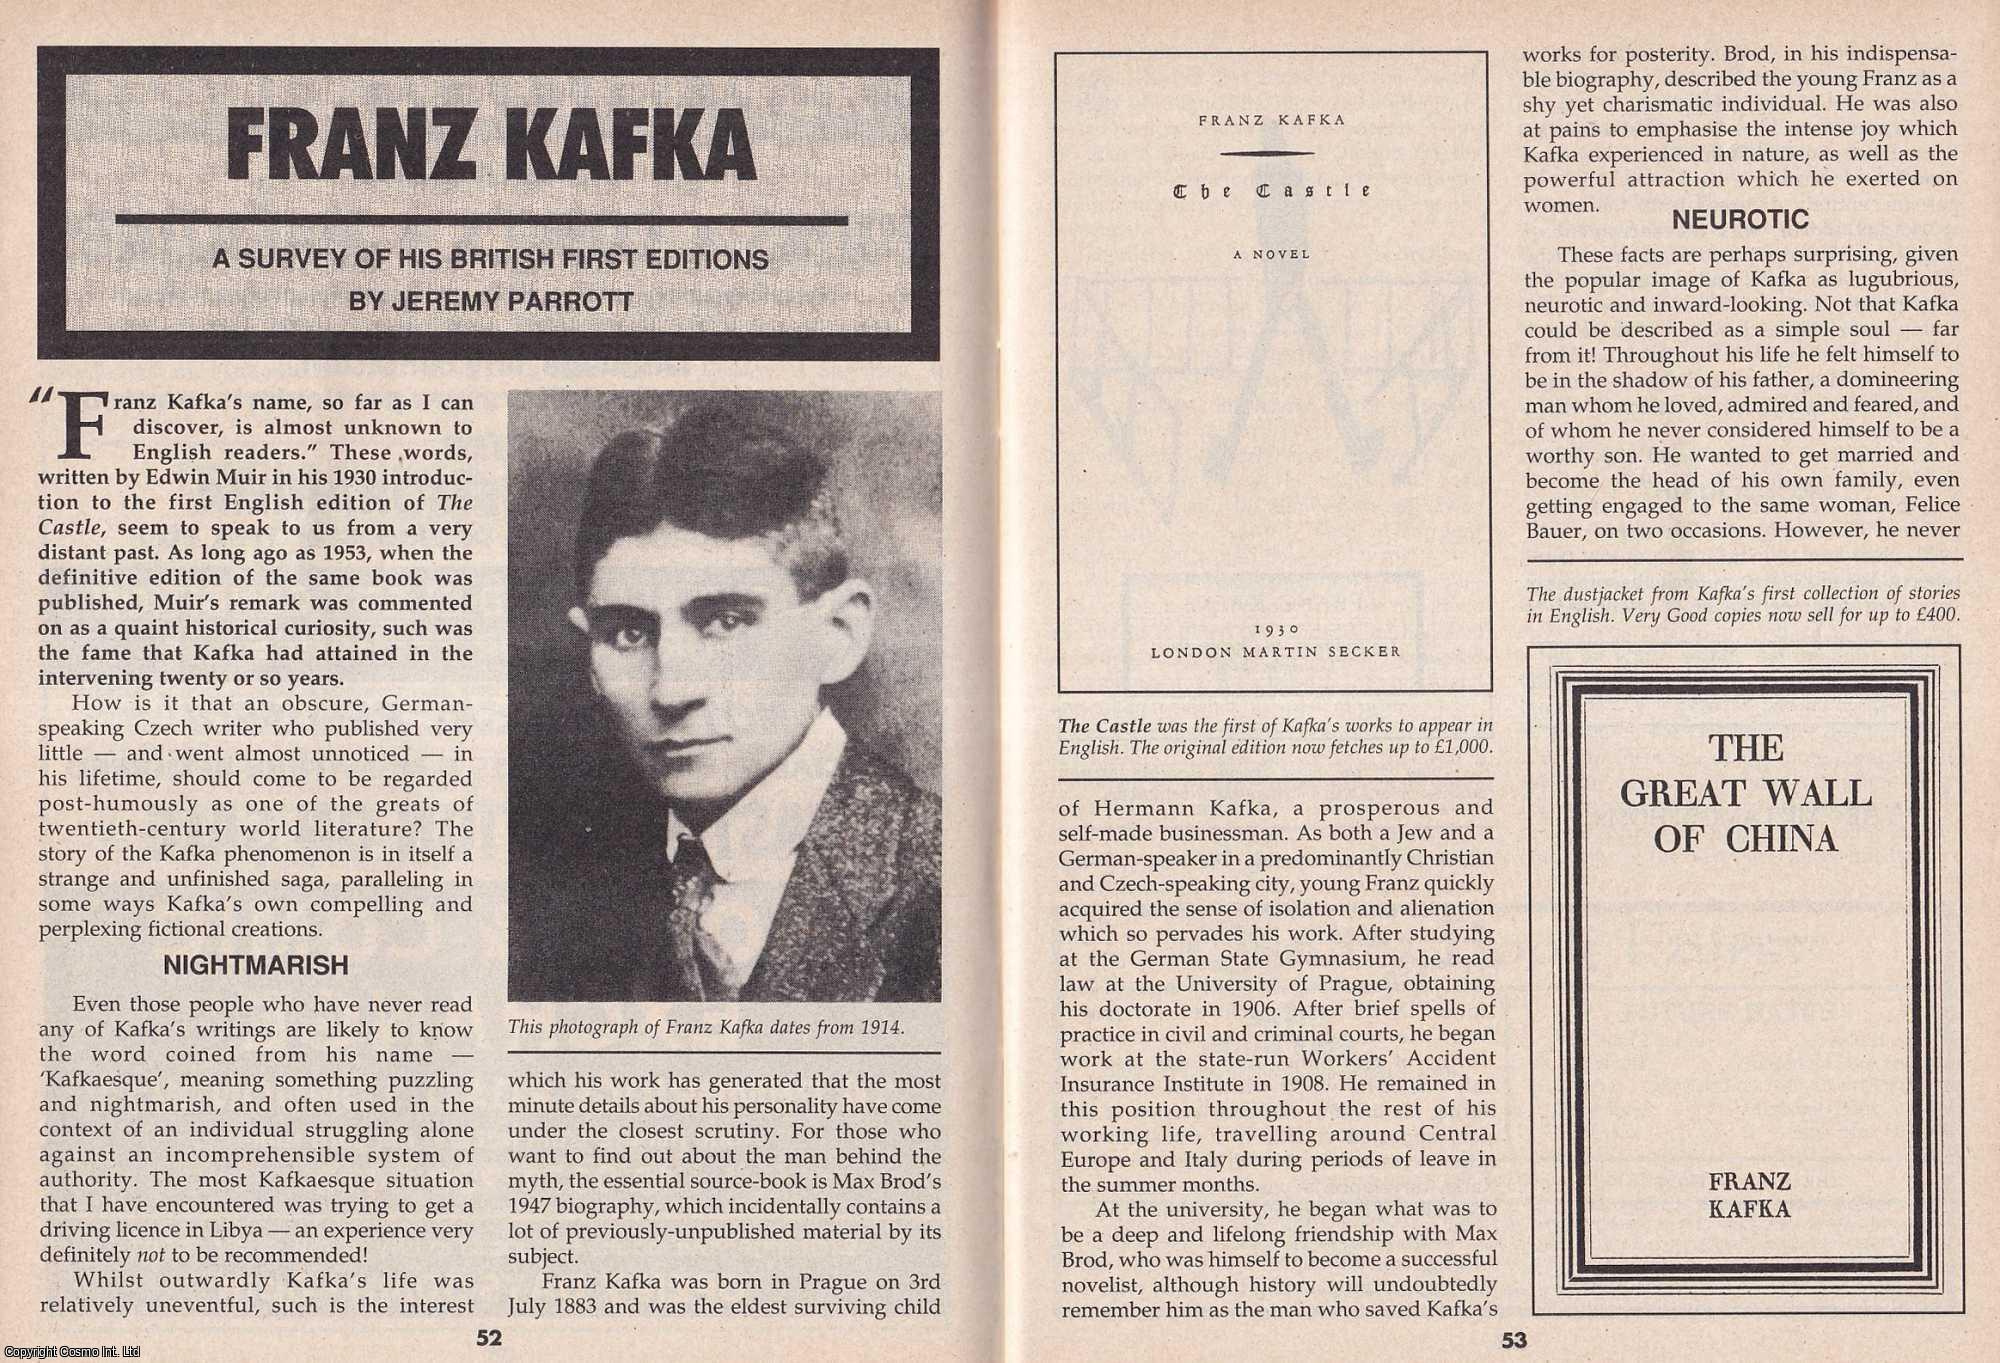 Jeremy Parrott - Franz Kafka. A Survey of his British First Editions. This is an original article separated from an issue of The Book & Magazine Collector publication, 1996.